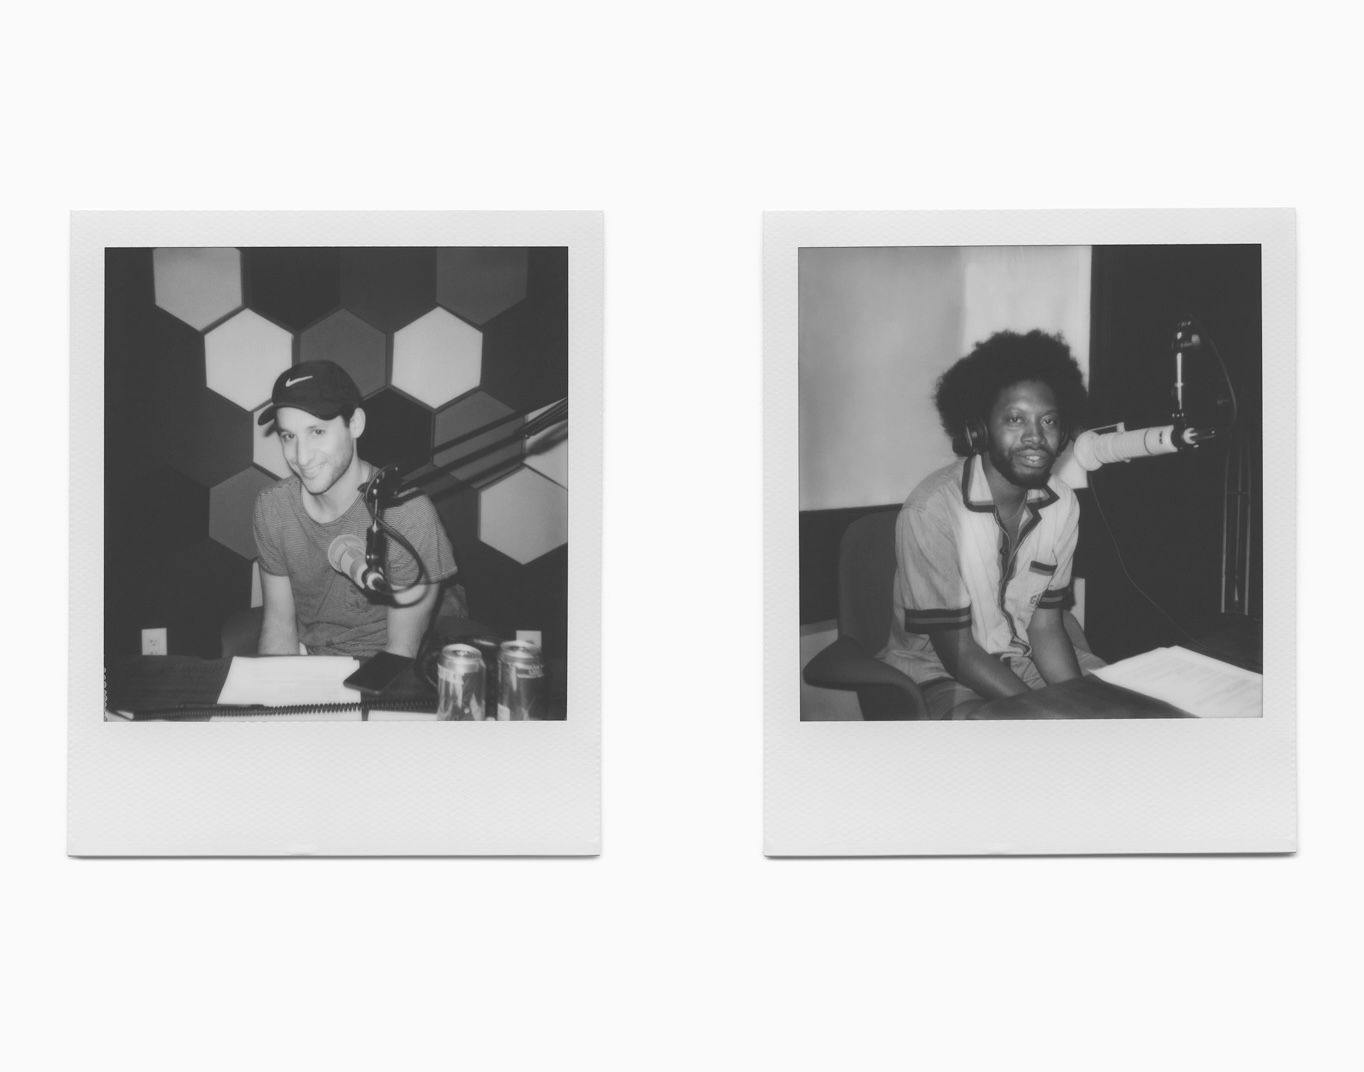 A photograph of Jordan Wolfson and Jeremy O. Harris at Hangar studios in New York, dated June 2019.